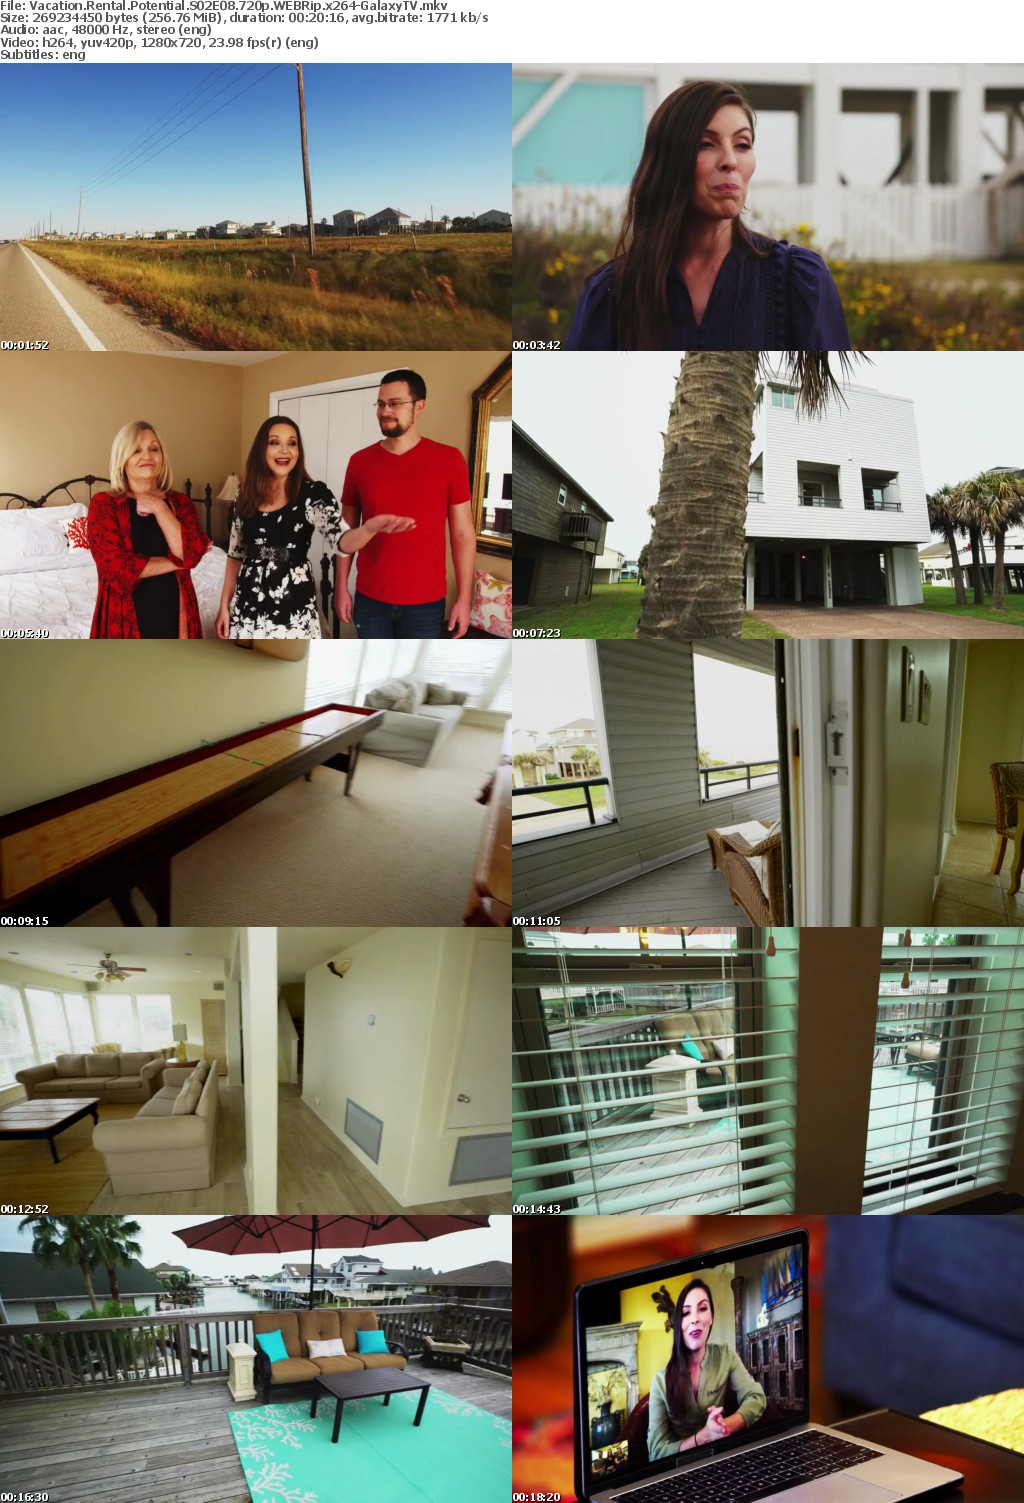 Vacation Rental Potential S02 COMPLETE 720p WEBRip x264-GalaxyTV